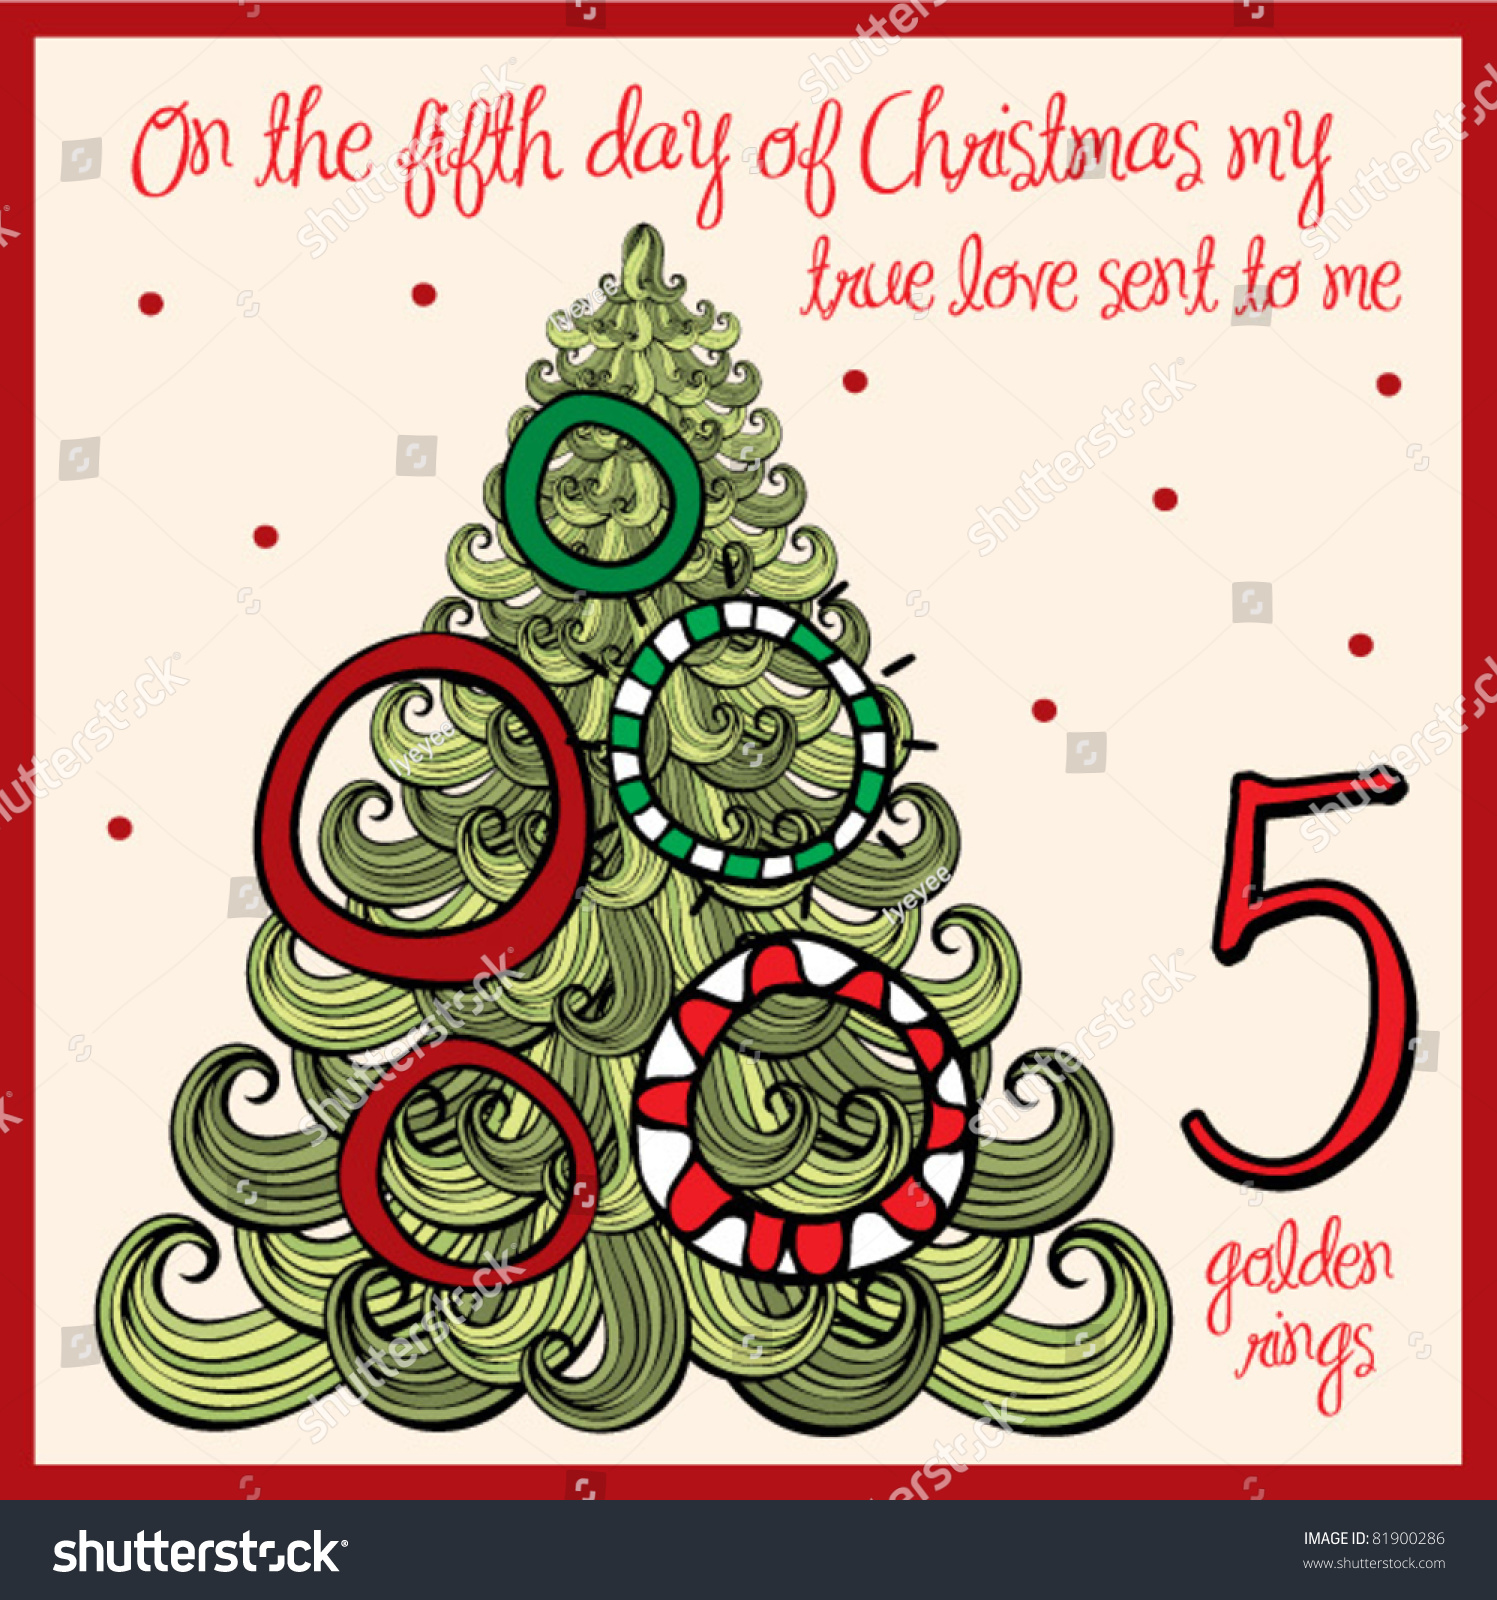 stock-vector-the-days-of-christmas-fifth-day-five-golden-rings-81900286.jpg